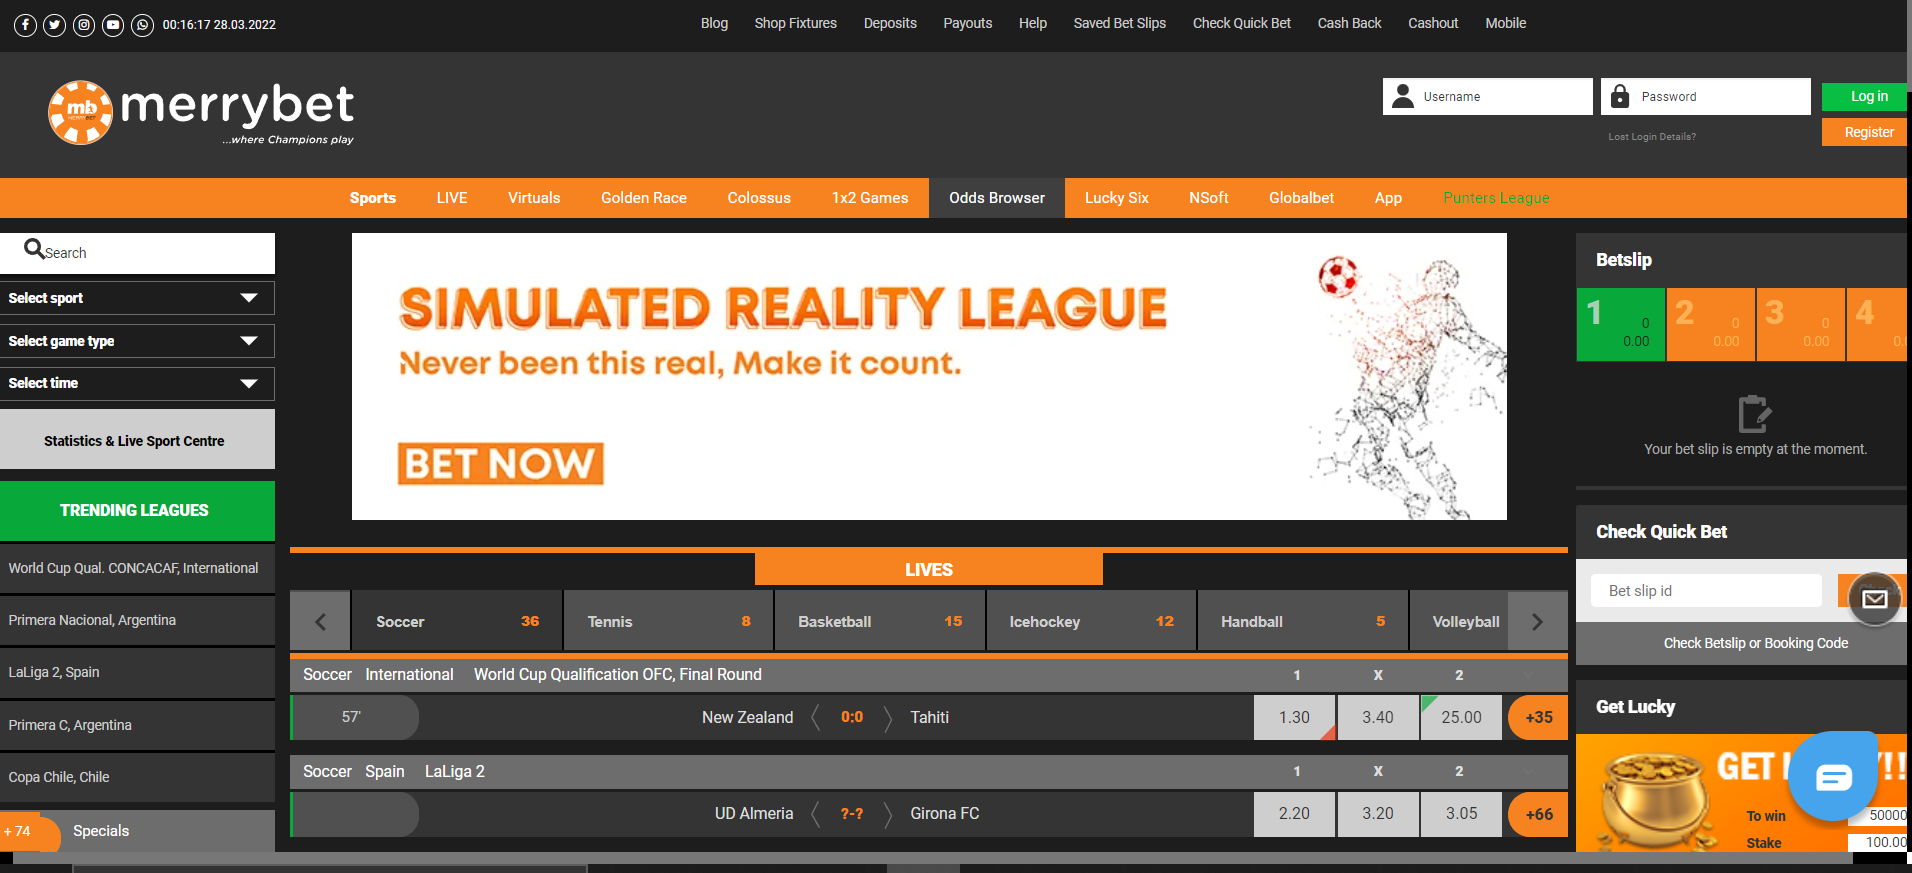 The sportsbook covers numerous leagues and sports for betting to its customers